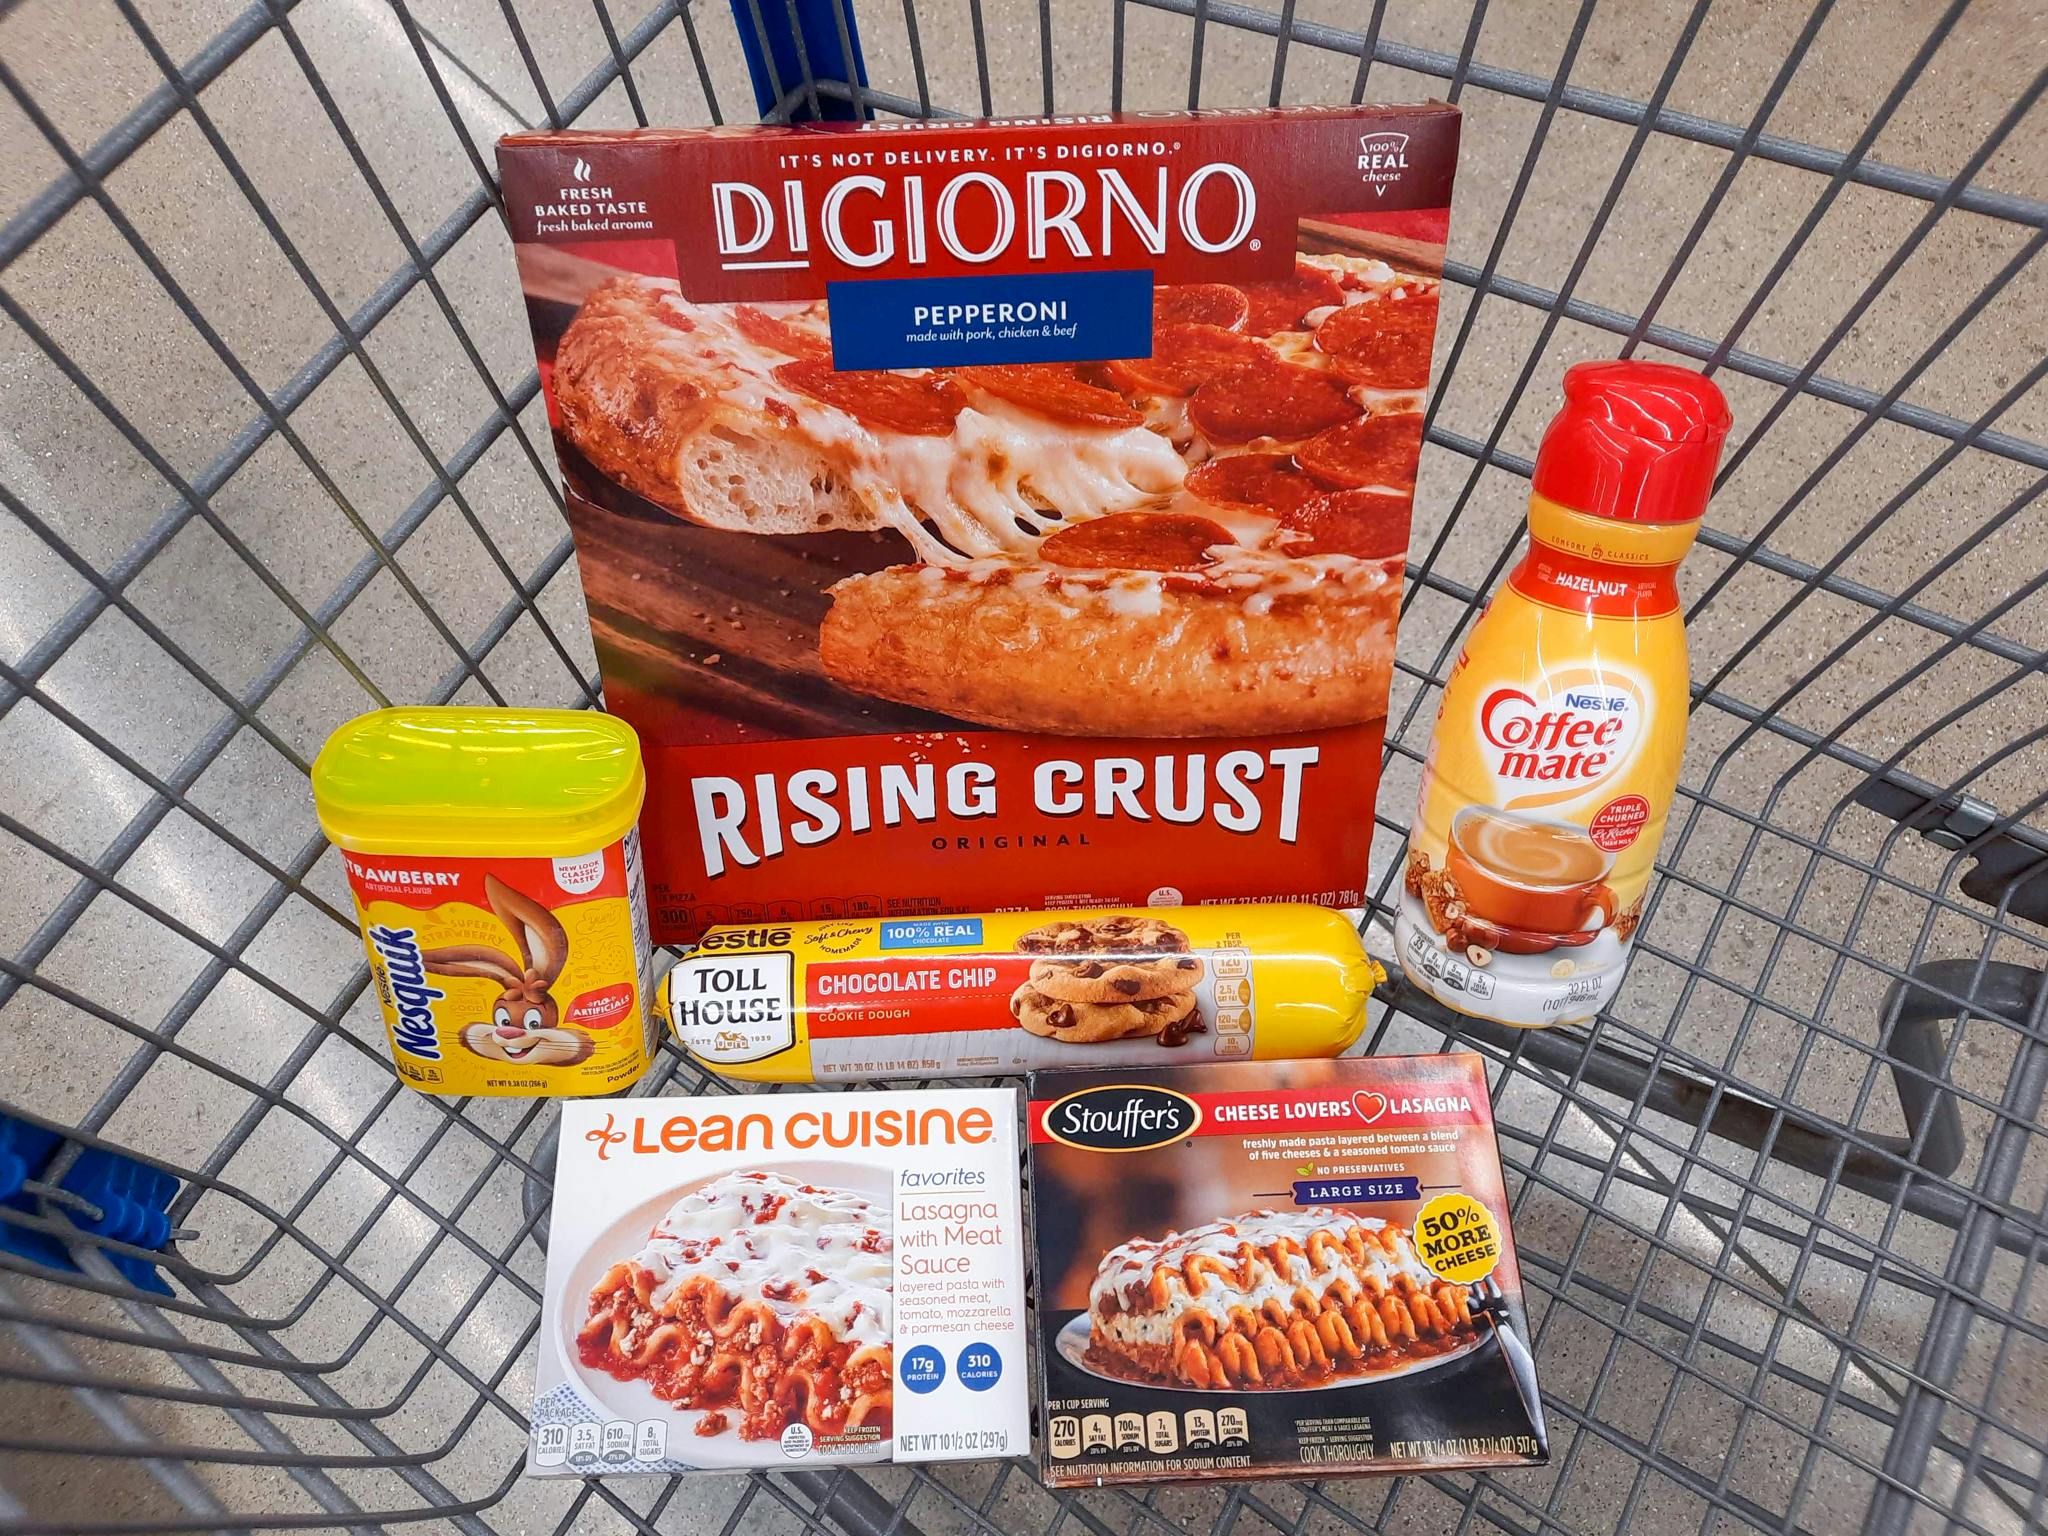 Digiorno, Nesquik, Lean Cuisine, Stouffers, Coffee Mate, and Nestle Toll House products in Walmart shopping cart